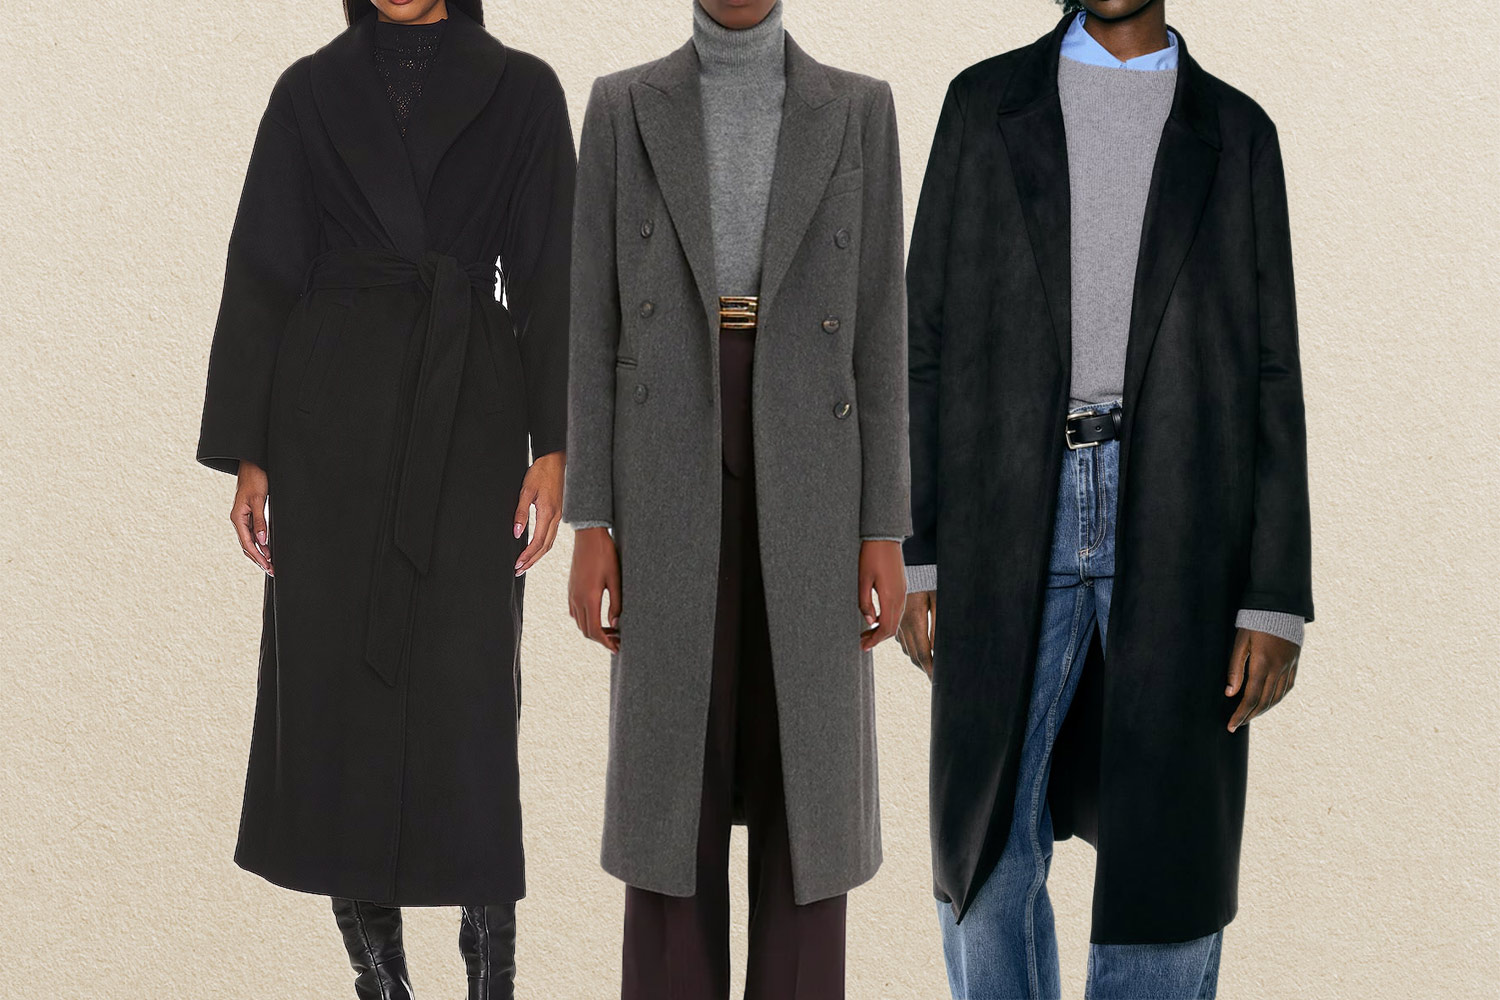 Two models in long black coats and another model in a grey long coat